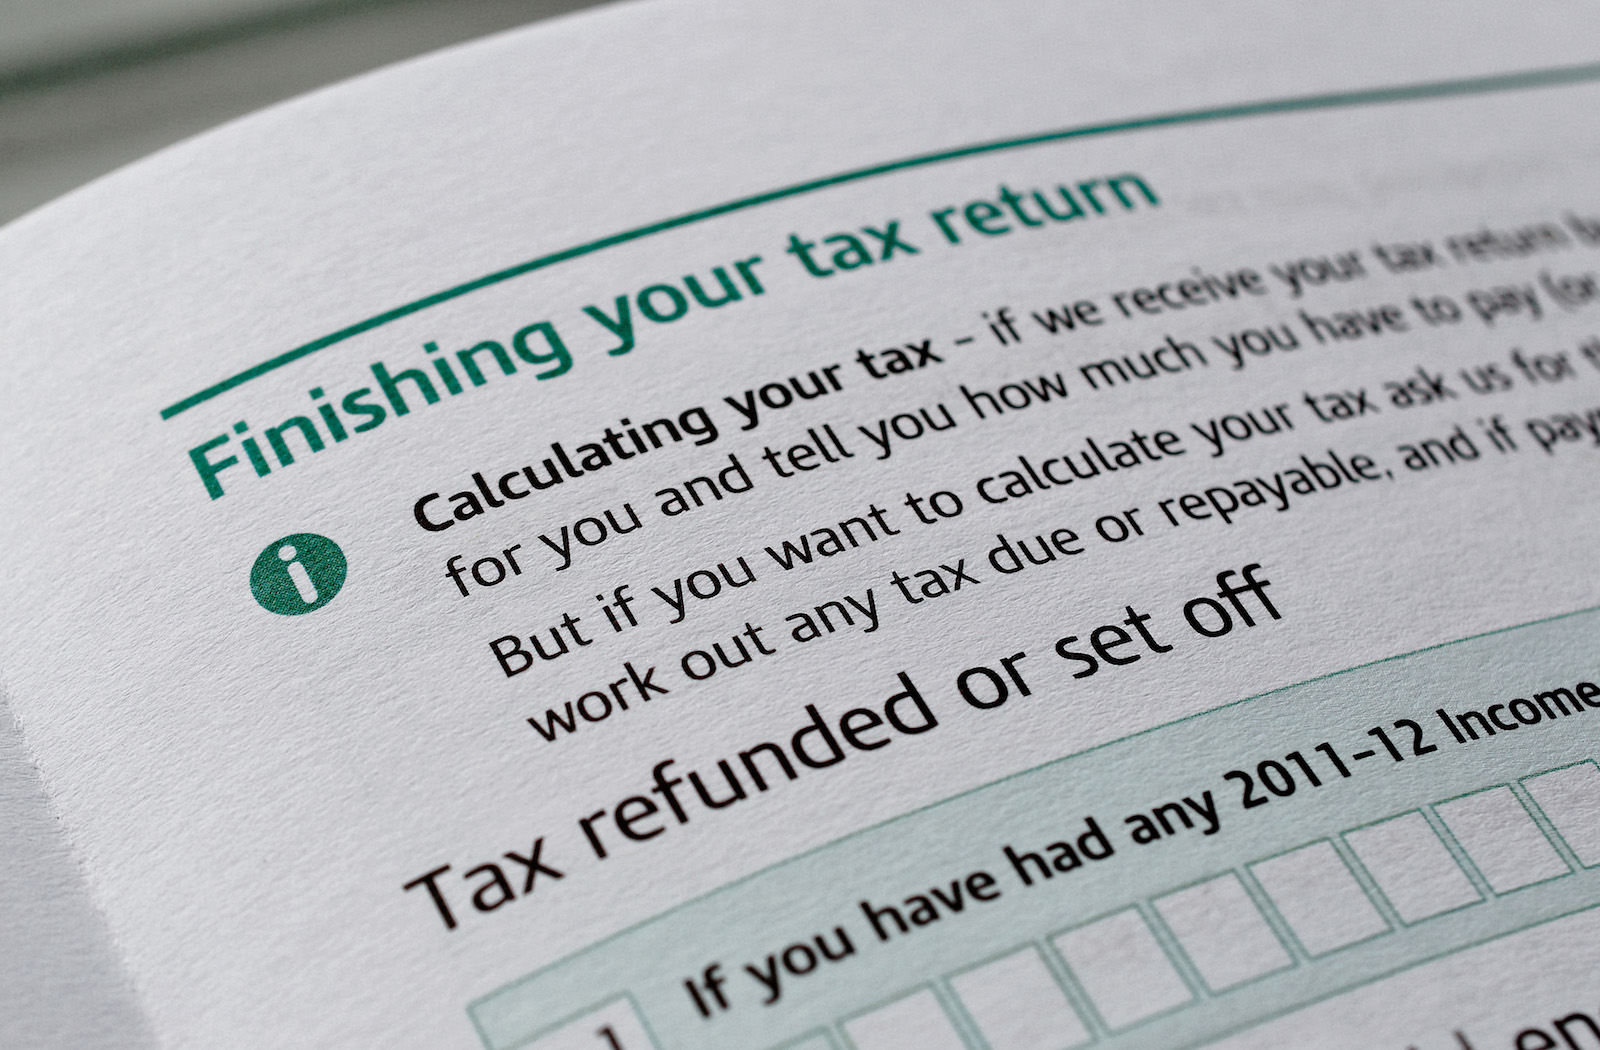 Five tips for completing that dreaded tax return…